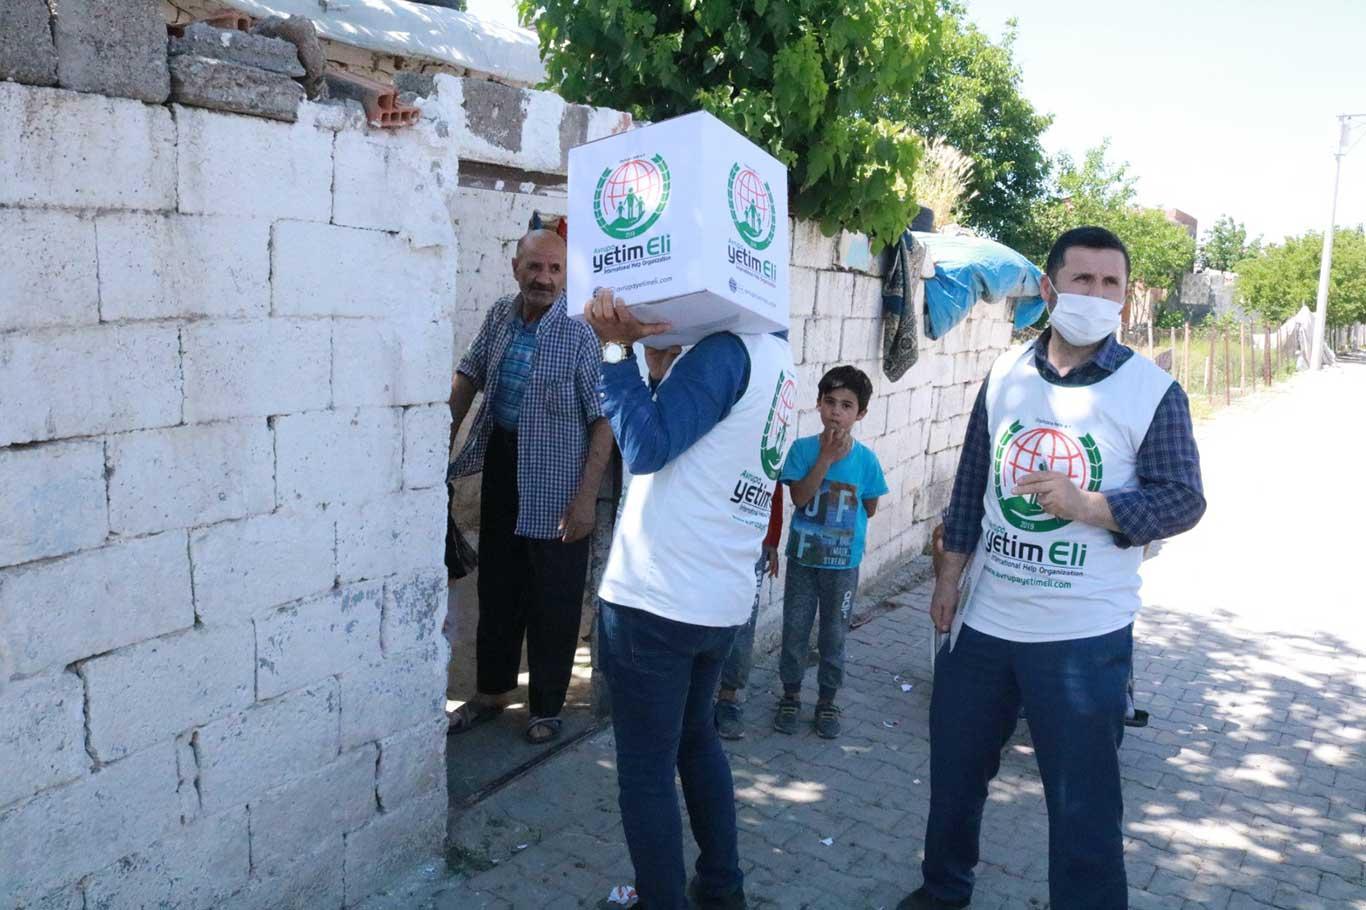 European Yetim Eli delivers food aid to hundreds of families in southeastern Turkey